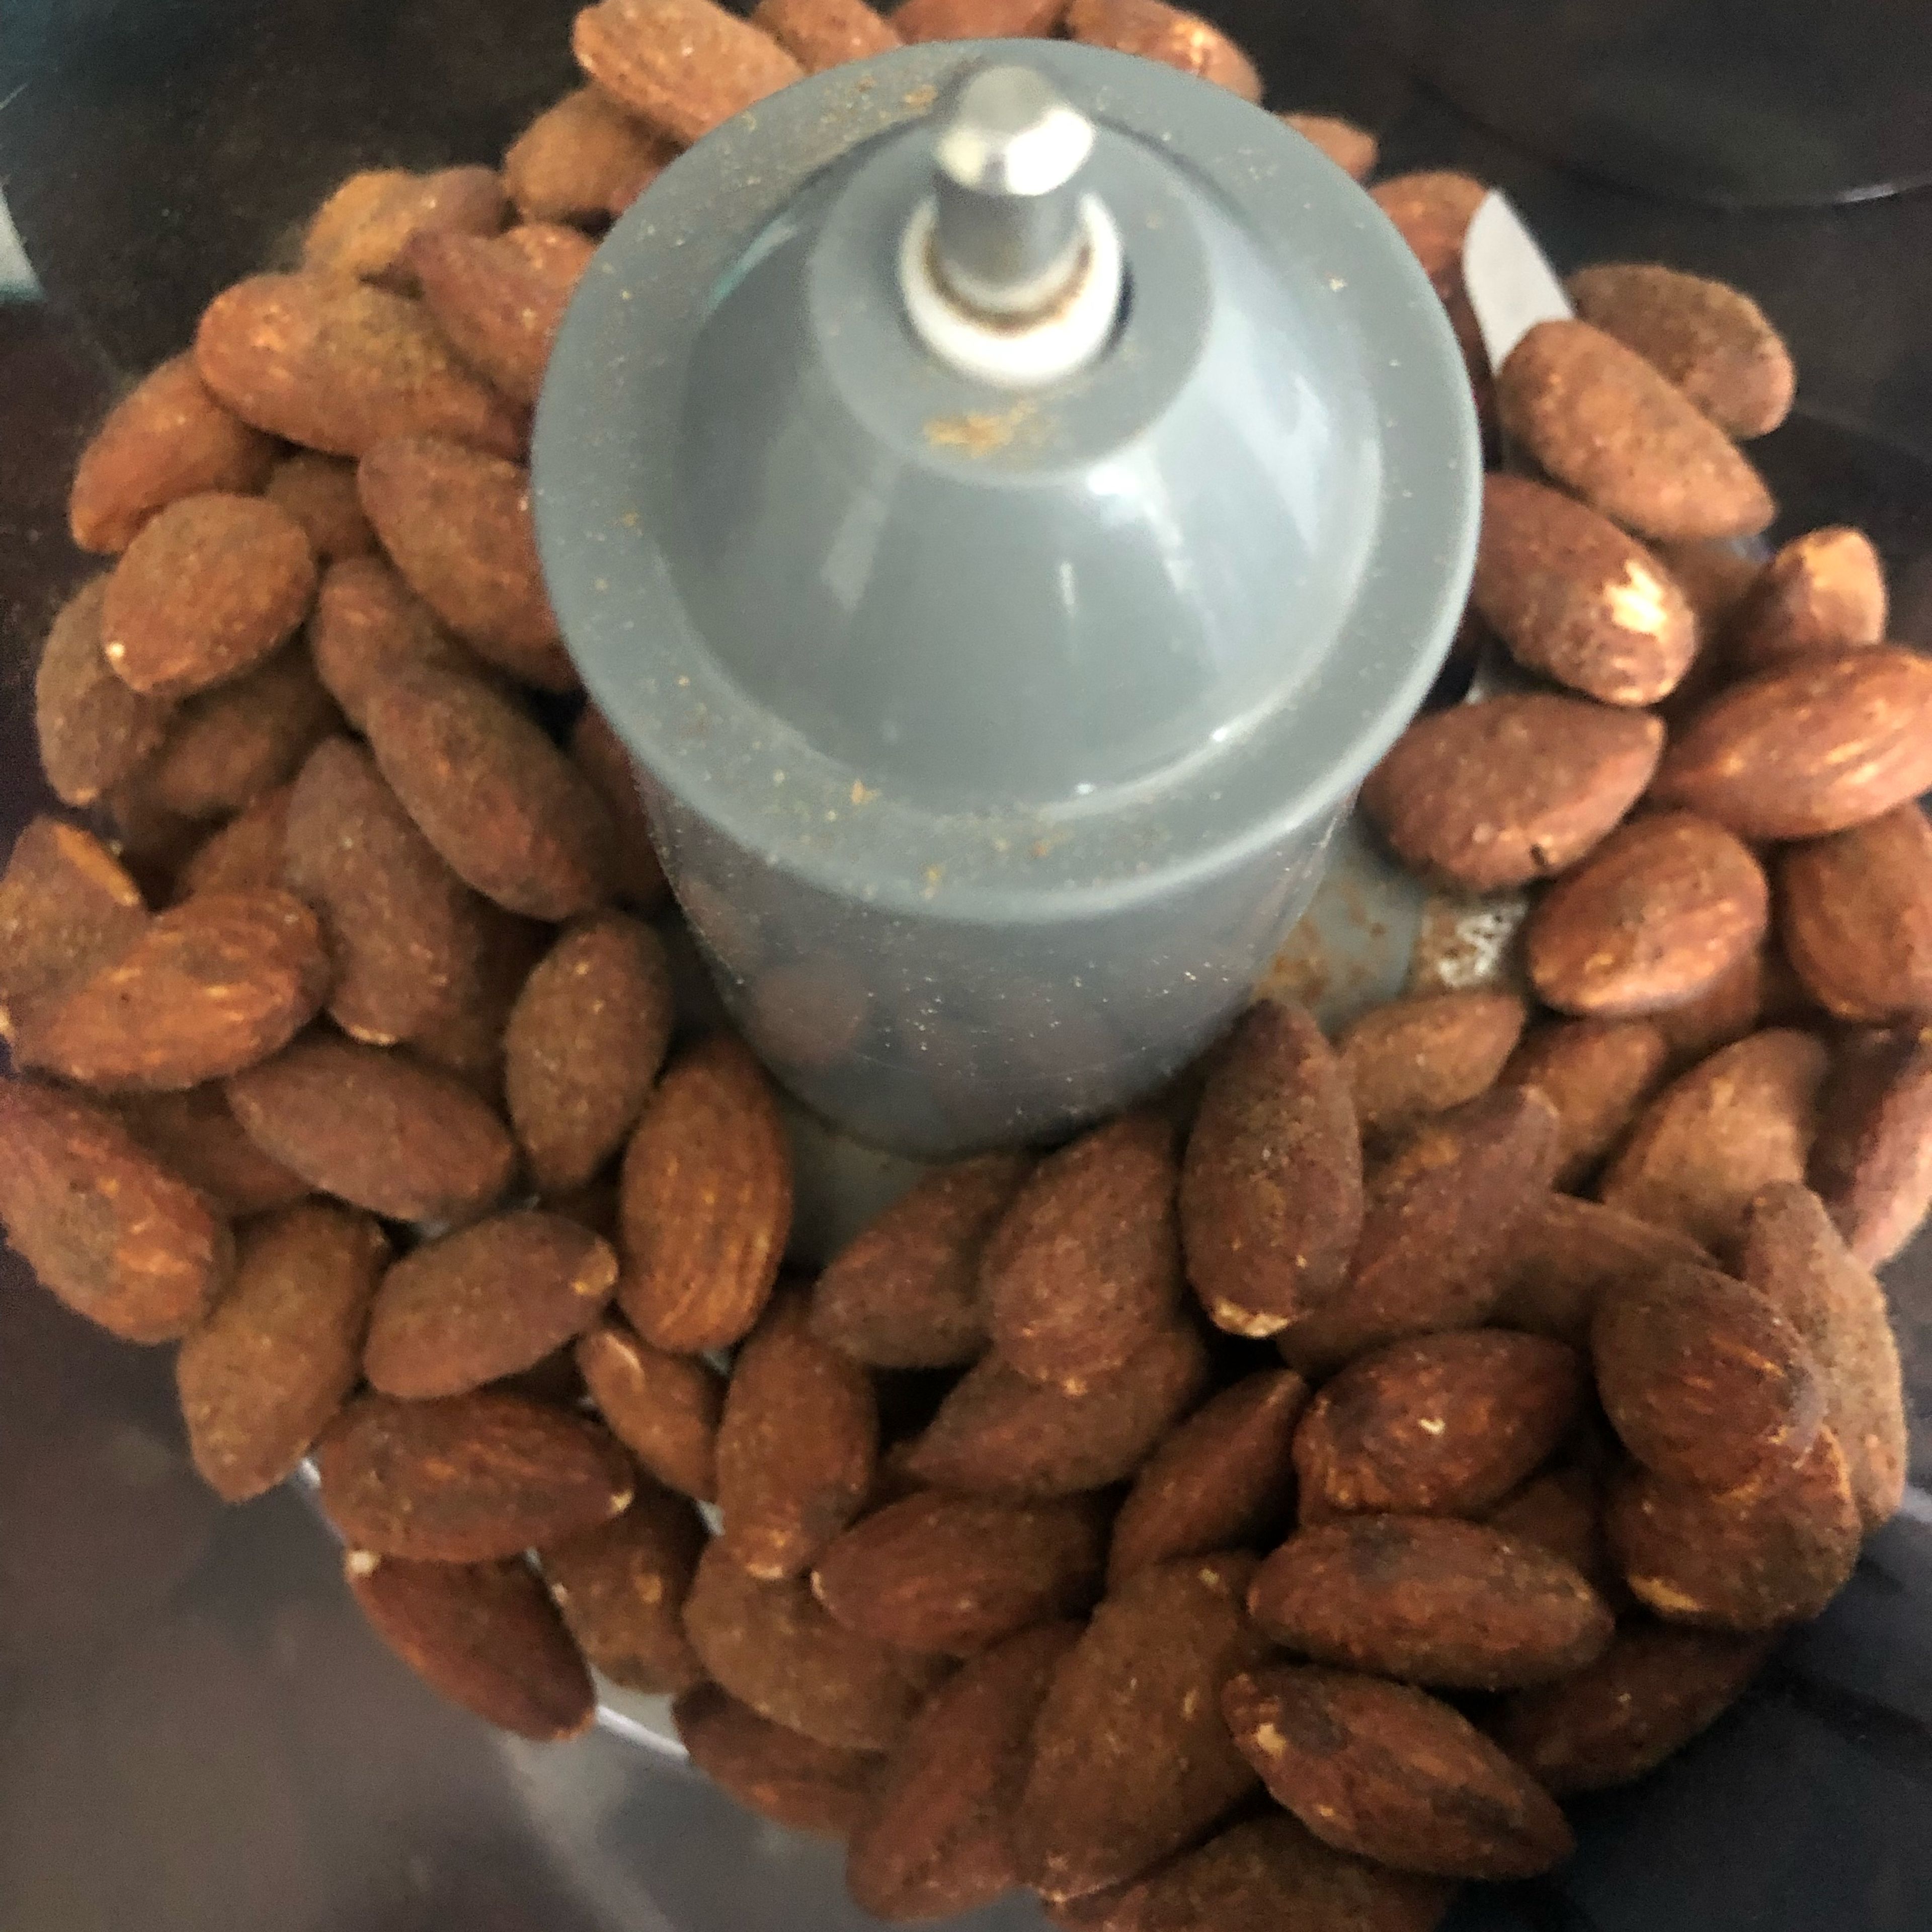 In a food processor add the smoked almond, honey, and coconut oil and mix well until all ingredients are combined. If you feel that the mixture is too thick add more coconut oil until it becomes more liquid.